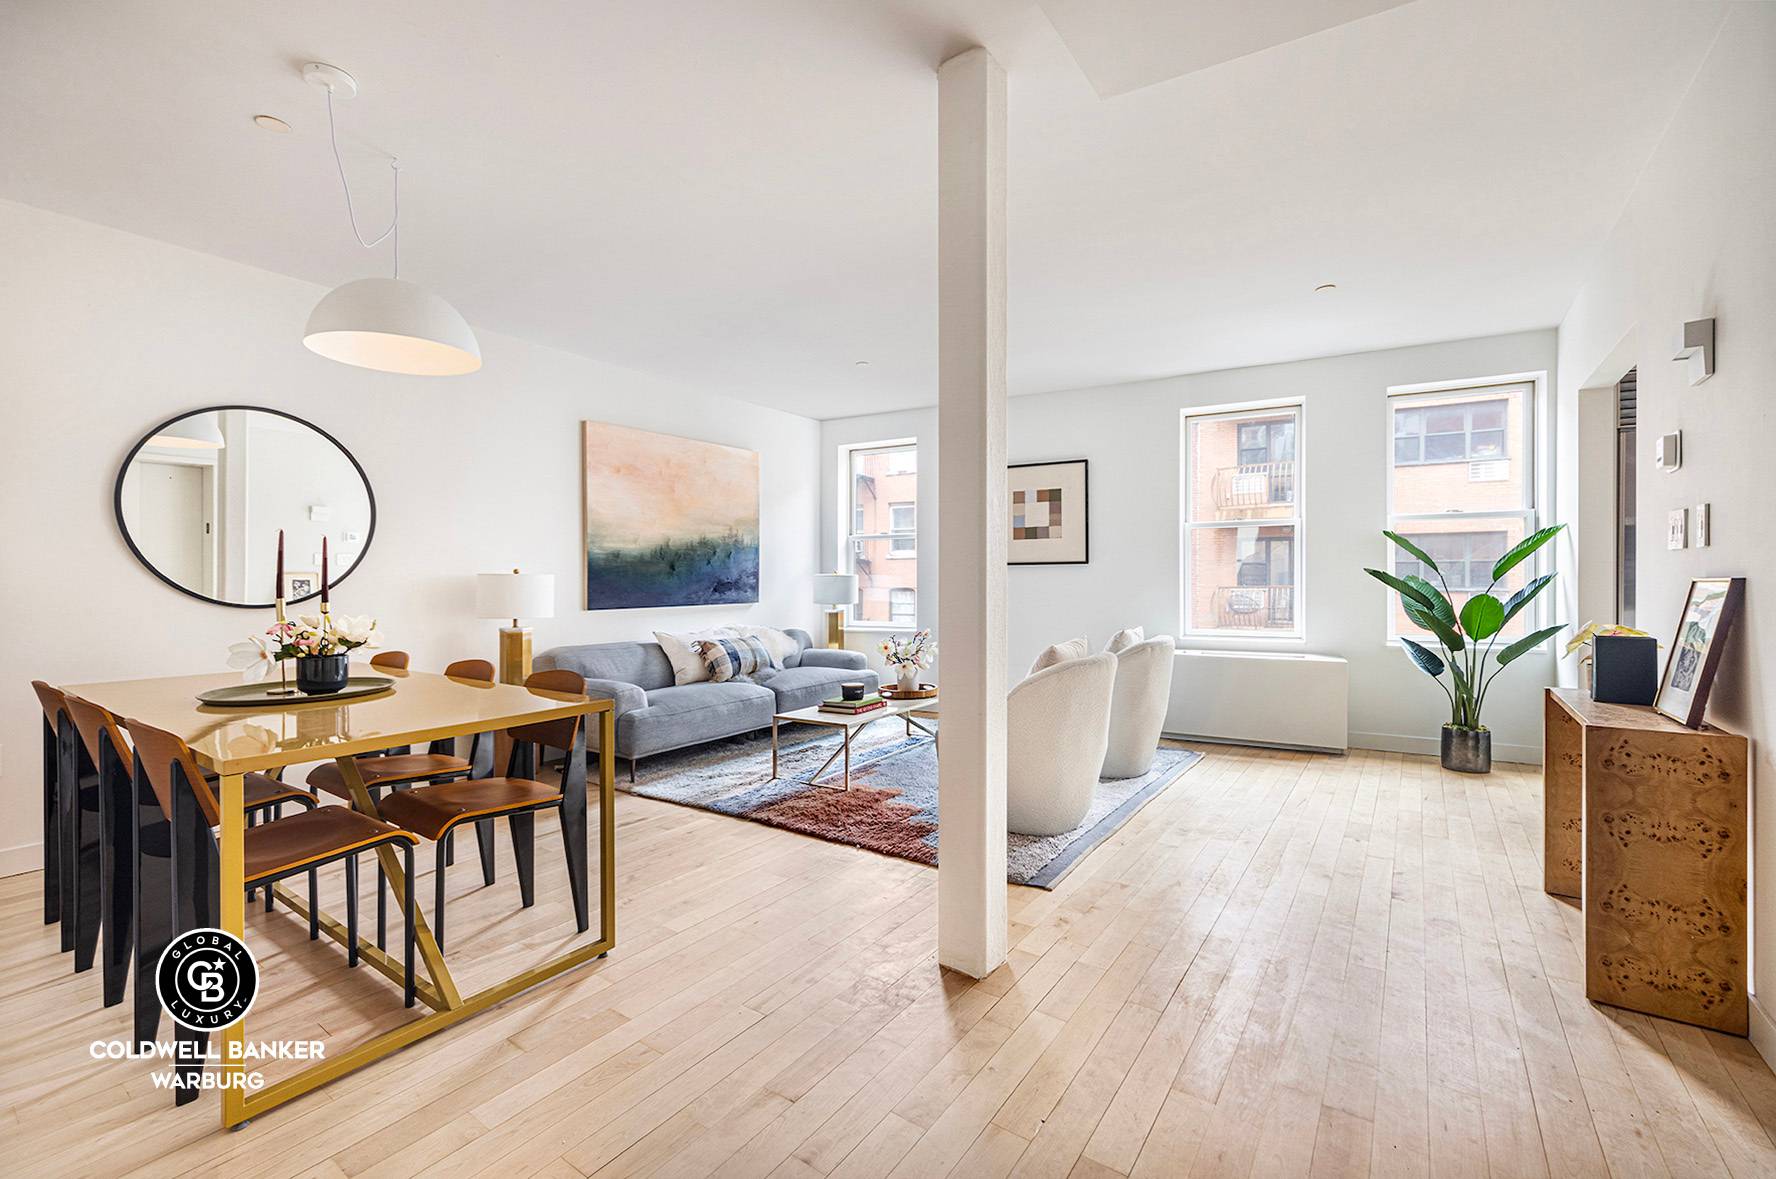 Situated at the nexus of Nolita, Little Italy, Bowery, and SoHo, this chic and modern boutique condominium home is surrounded by trendy shops and diverse culinary delights.